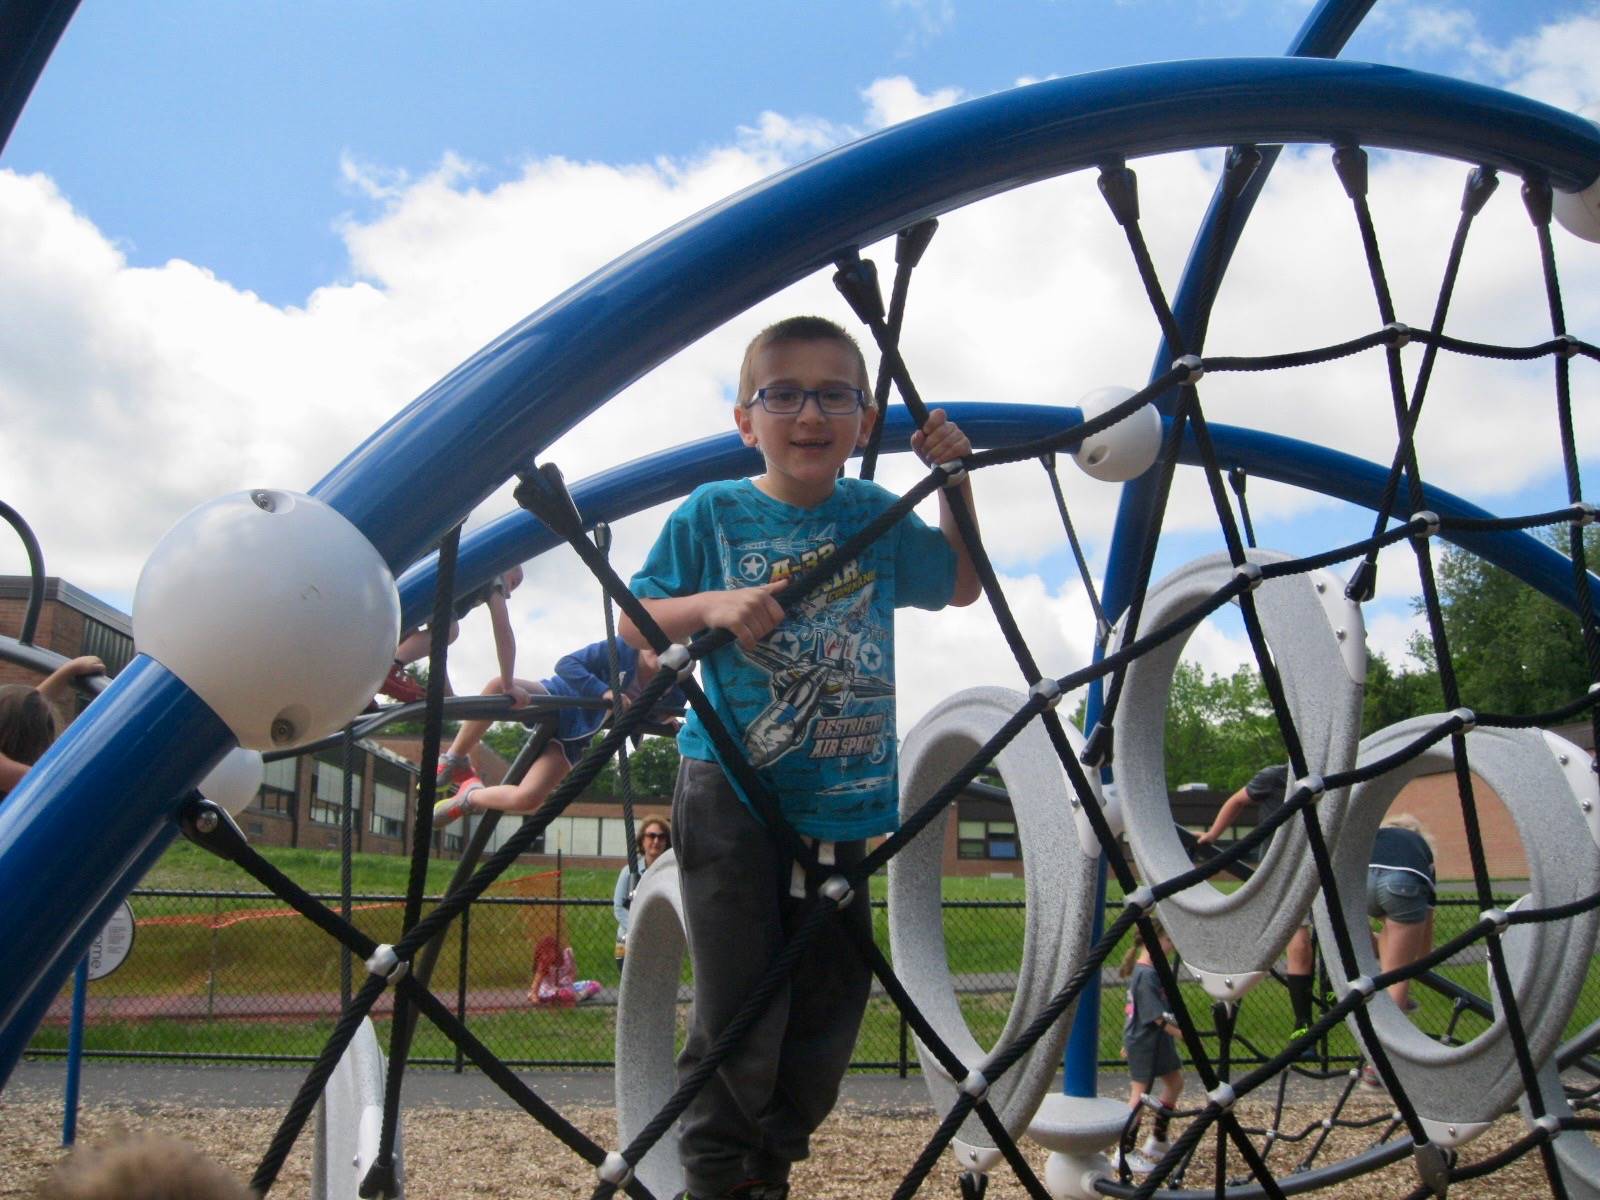 A student trying out the playground.